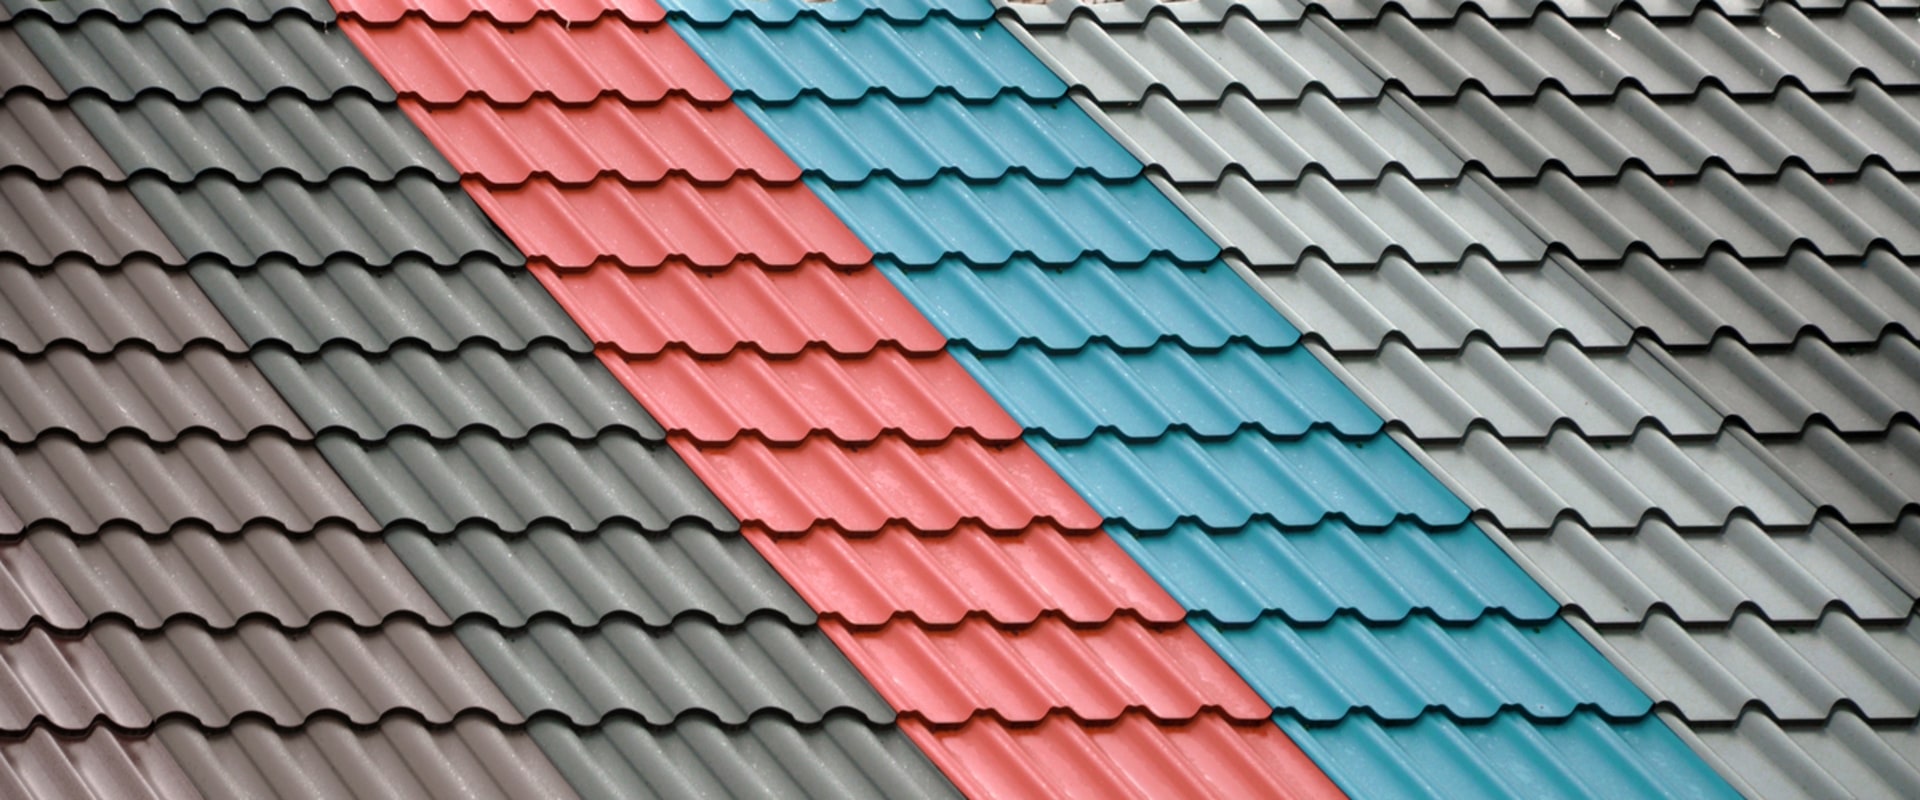 What's the Most Durable Roofing Material?